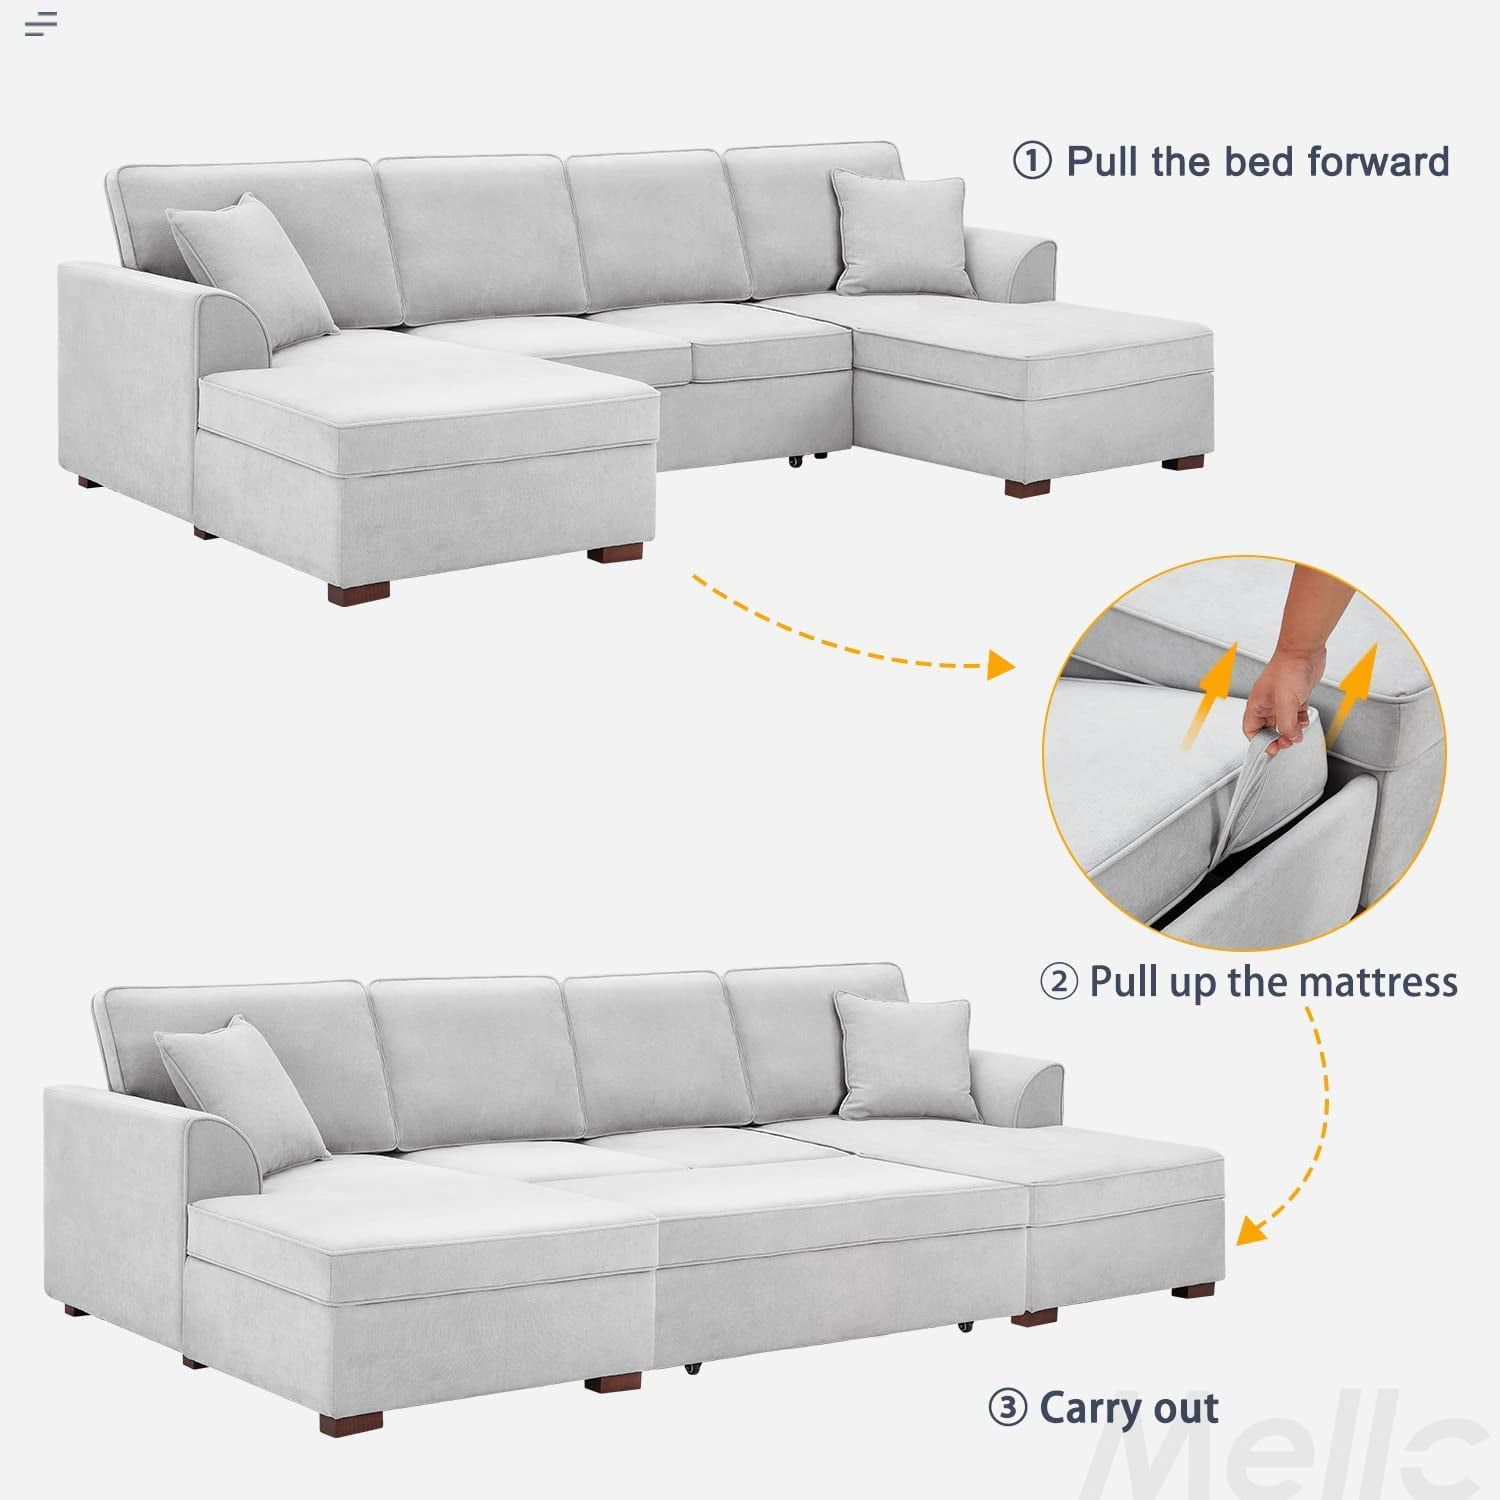 Mellcom U Shaped Sectional Sofa With Pull Out Bed, Upholstered Modular Couch  With Storage, Gray – Walmart In U Shaped Sectional Sofa With Pull Out Bed (View 11 of 20)